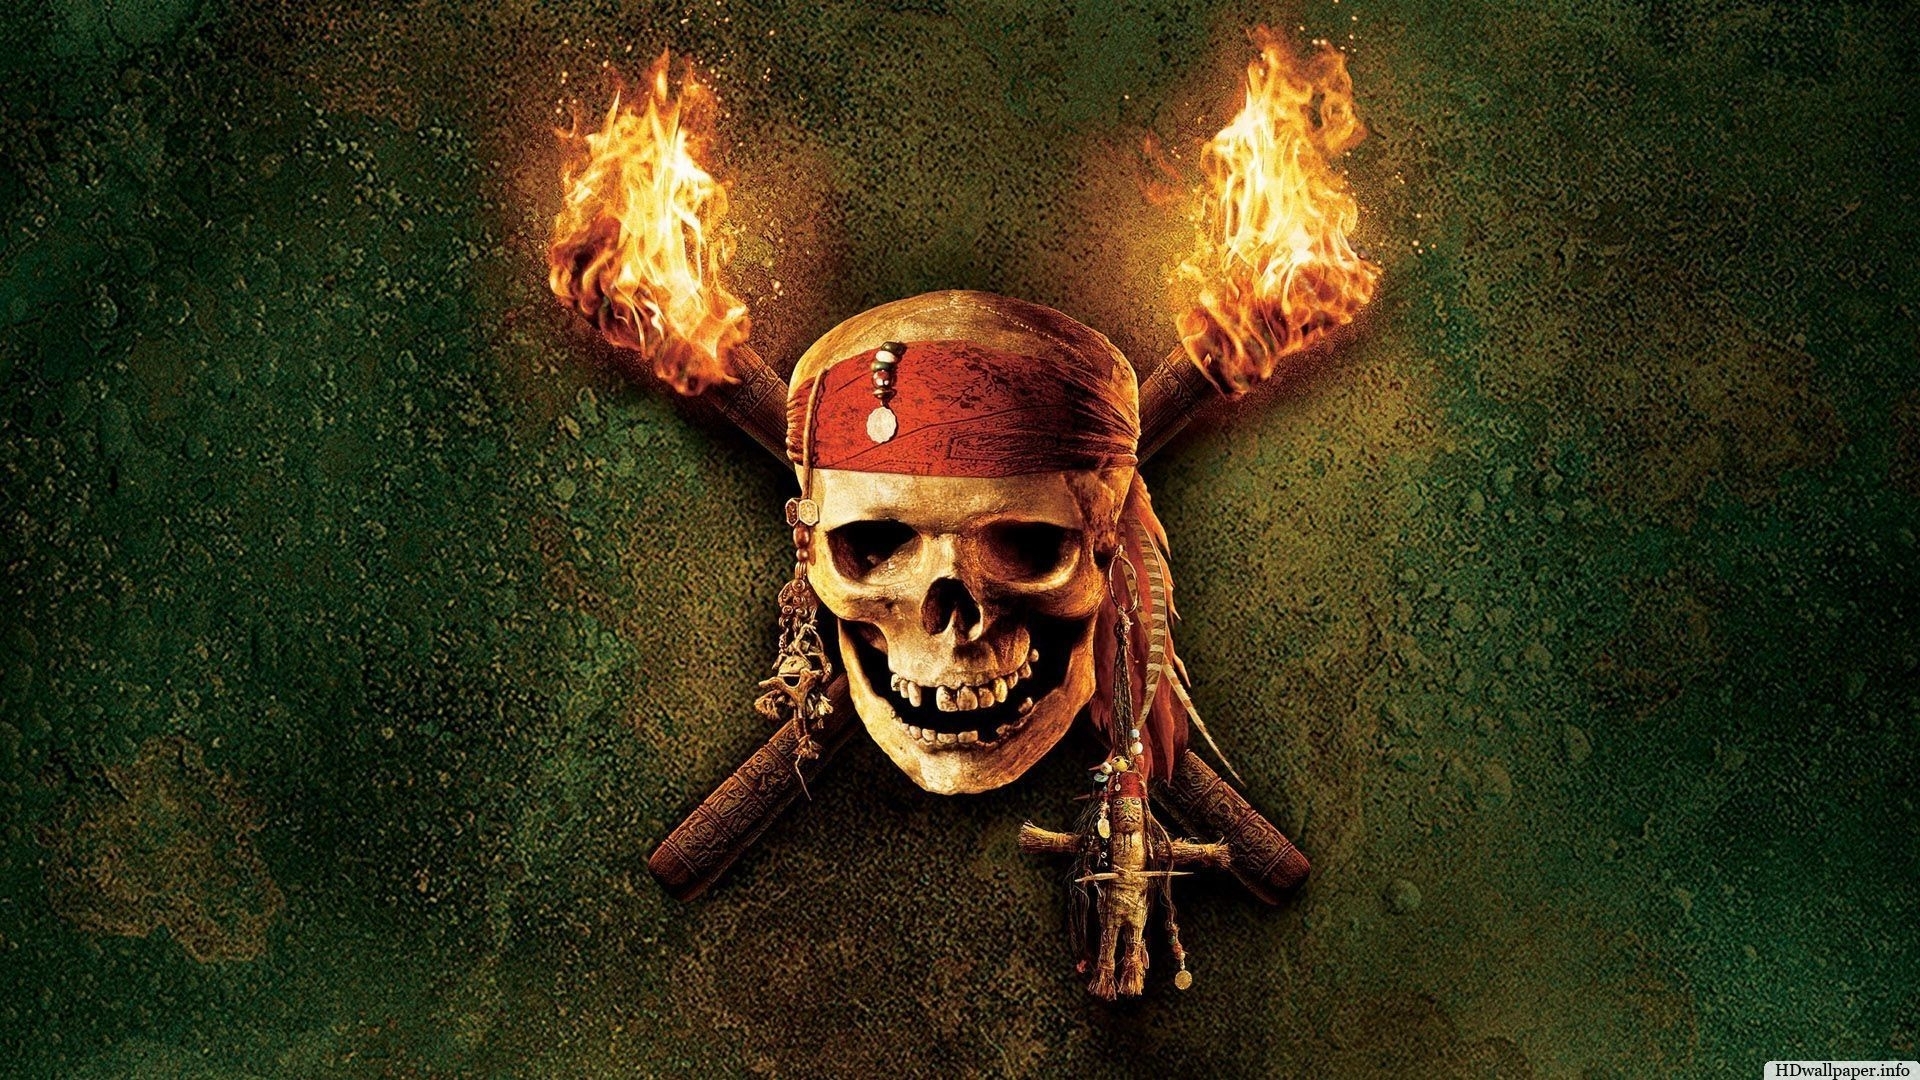 10 Best Pirates Of Caribbean Wallpaper FULL HD 1080p For PC Background